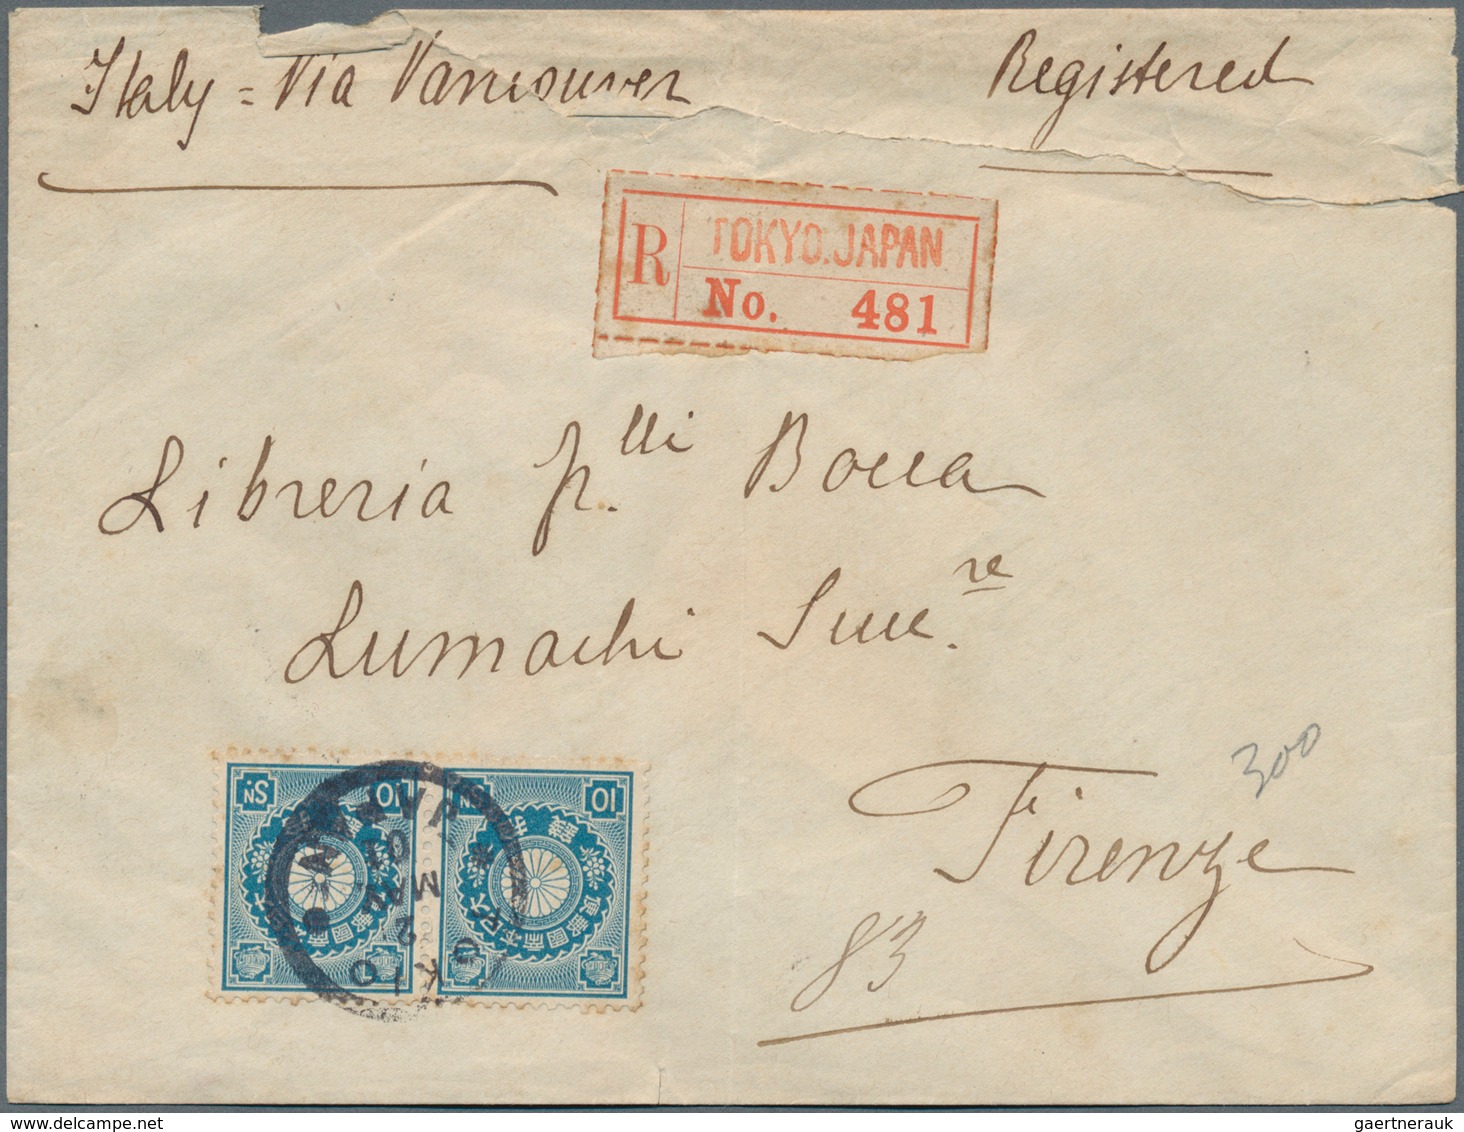 Japan: 1876/1914, covers (11 inc. registered x4) mostly to Italy inc. from "Institute for infectiono